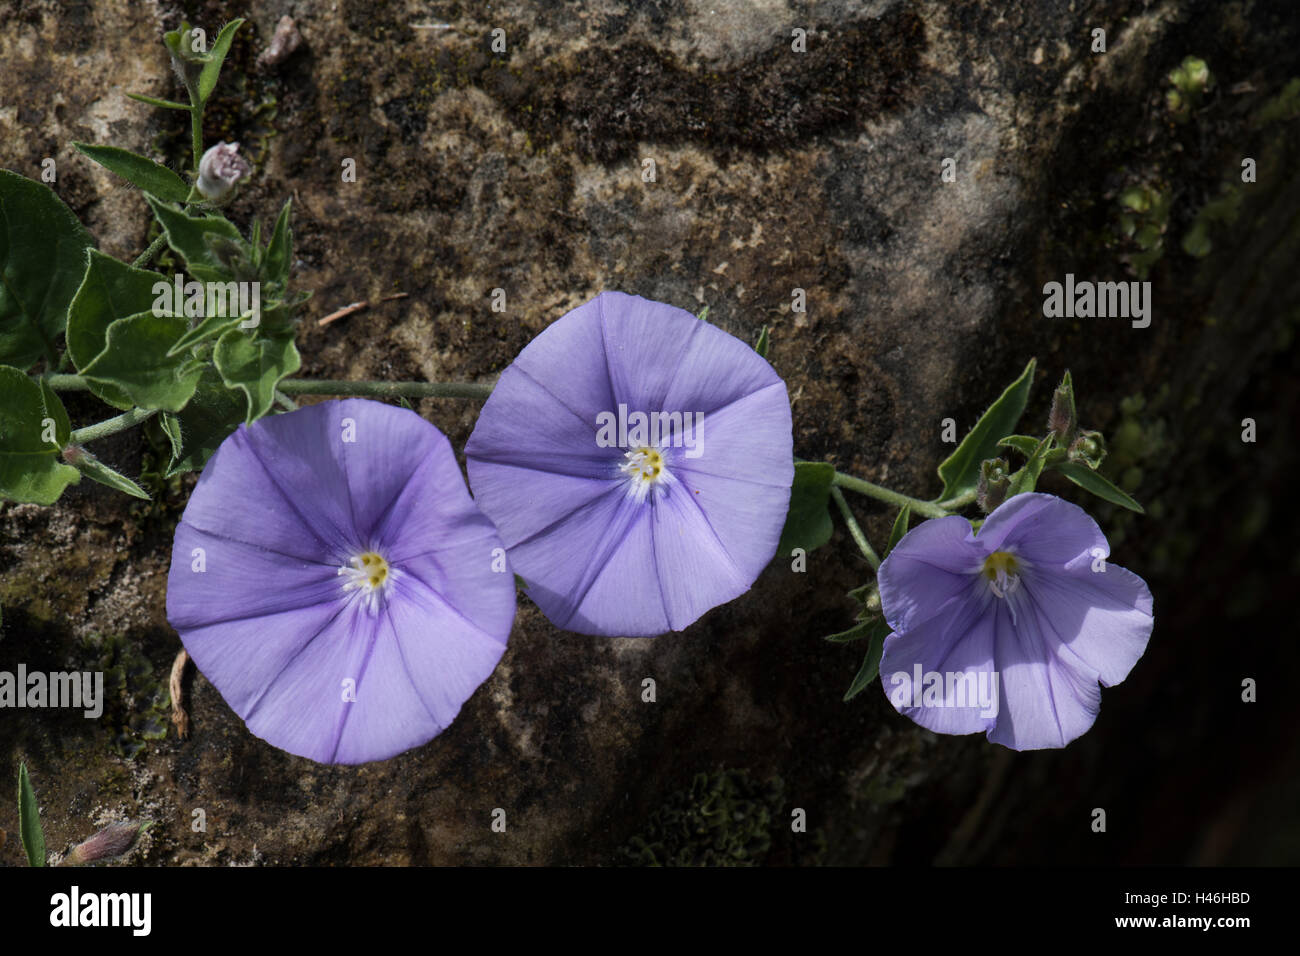 Convolvulus sabatius, ground blue-convolvulus, growing on rocks in Southen Italy. May. Stock Photo